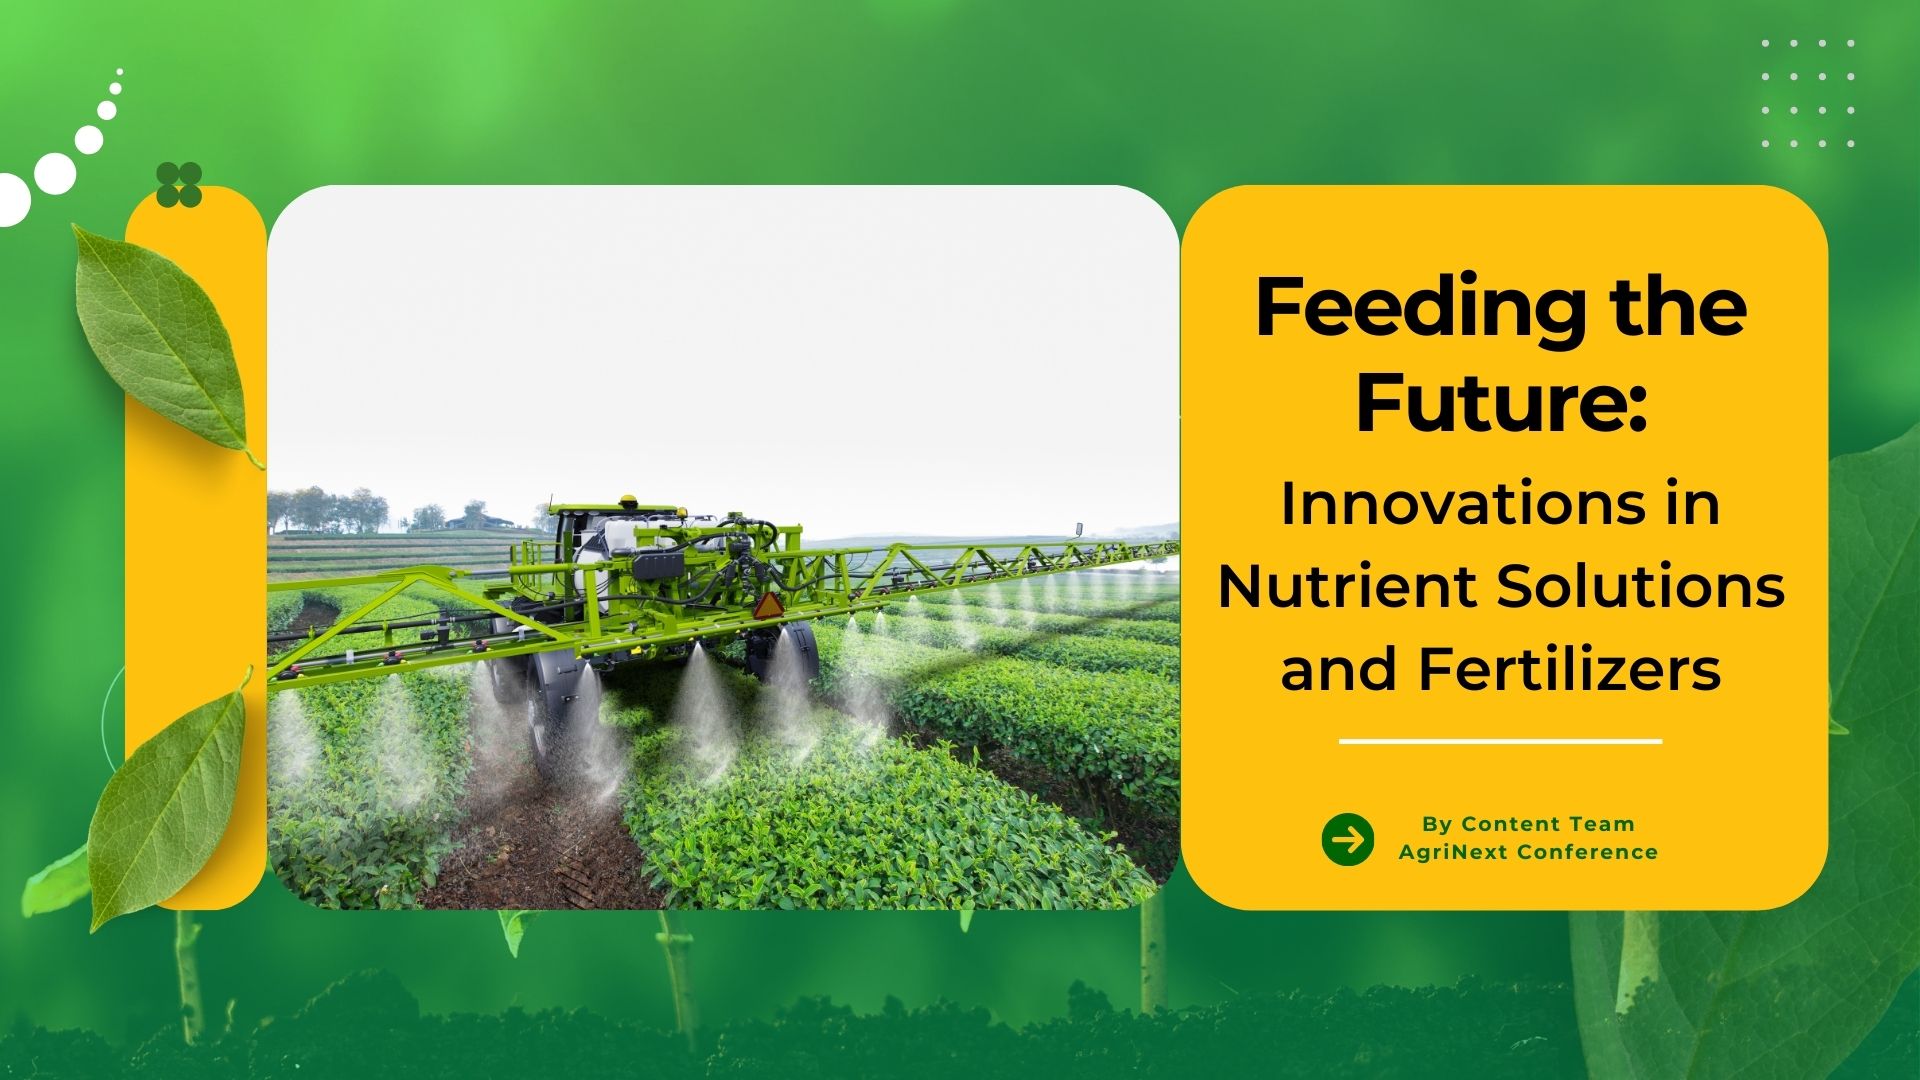 Feeding the Future: Innovations in Nutrient Solutions and Fertilizers